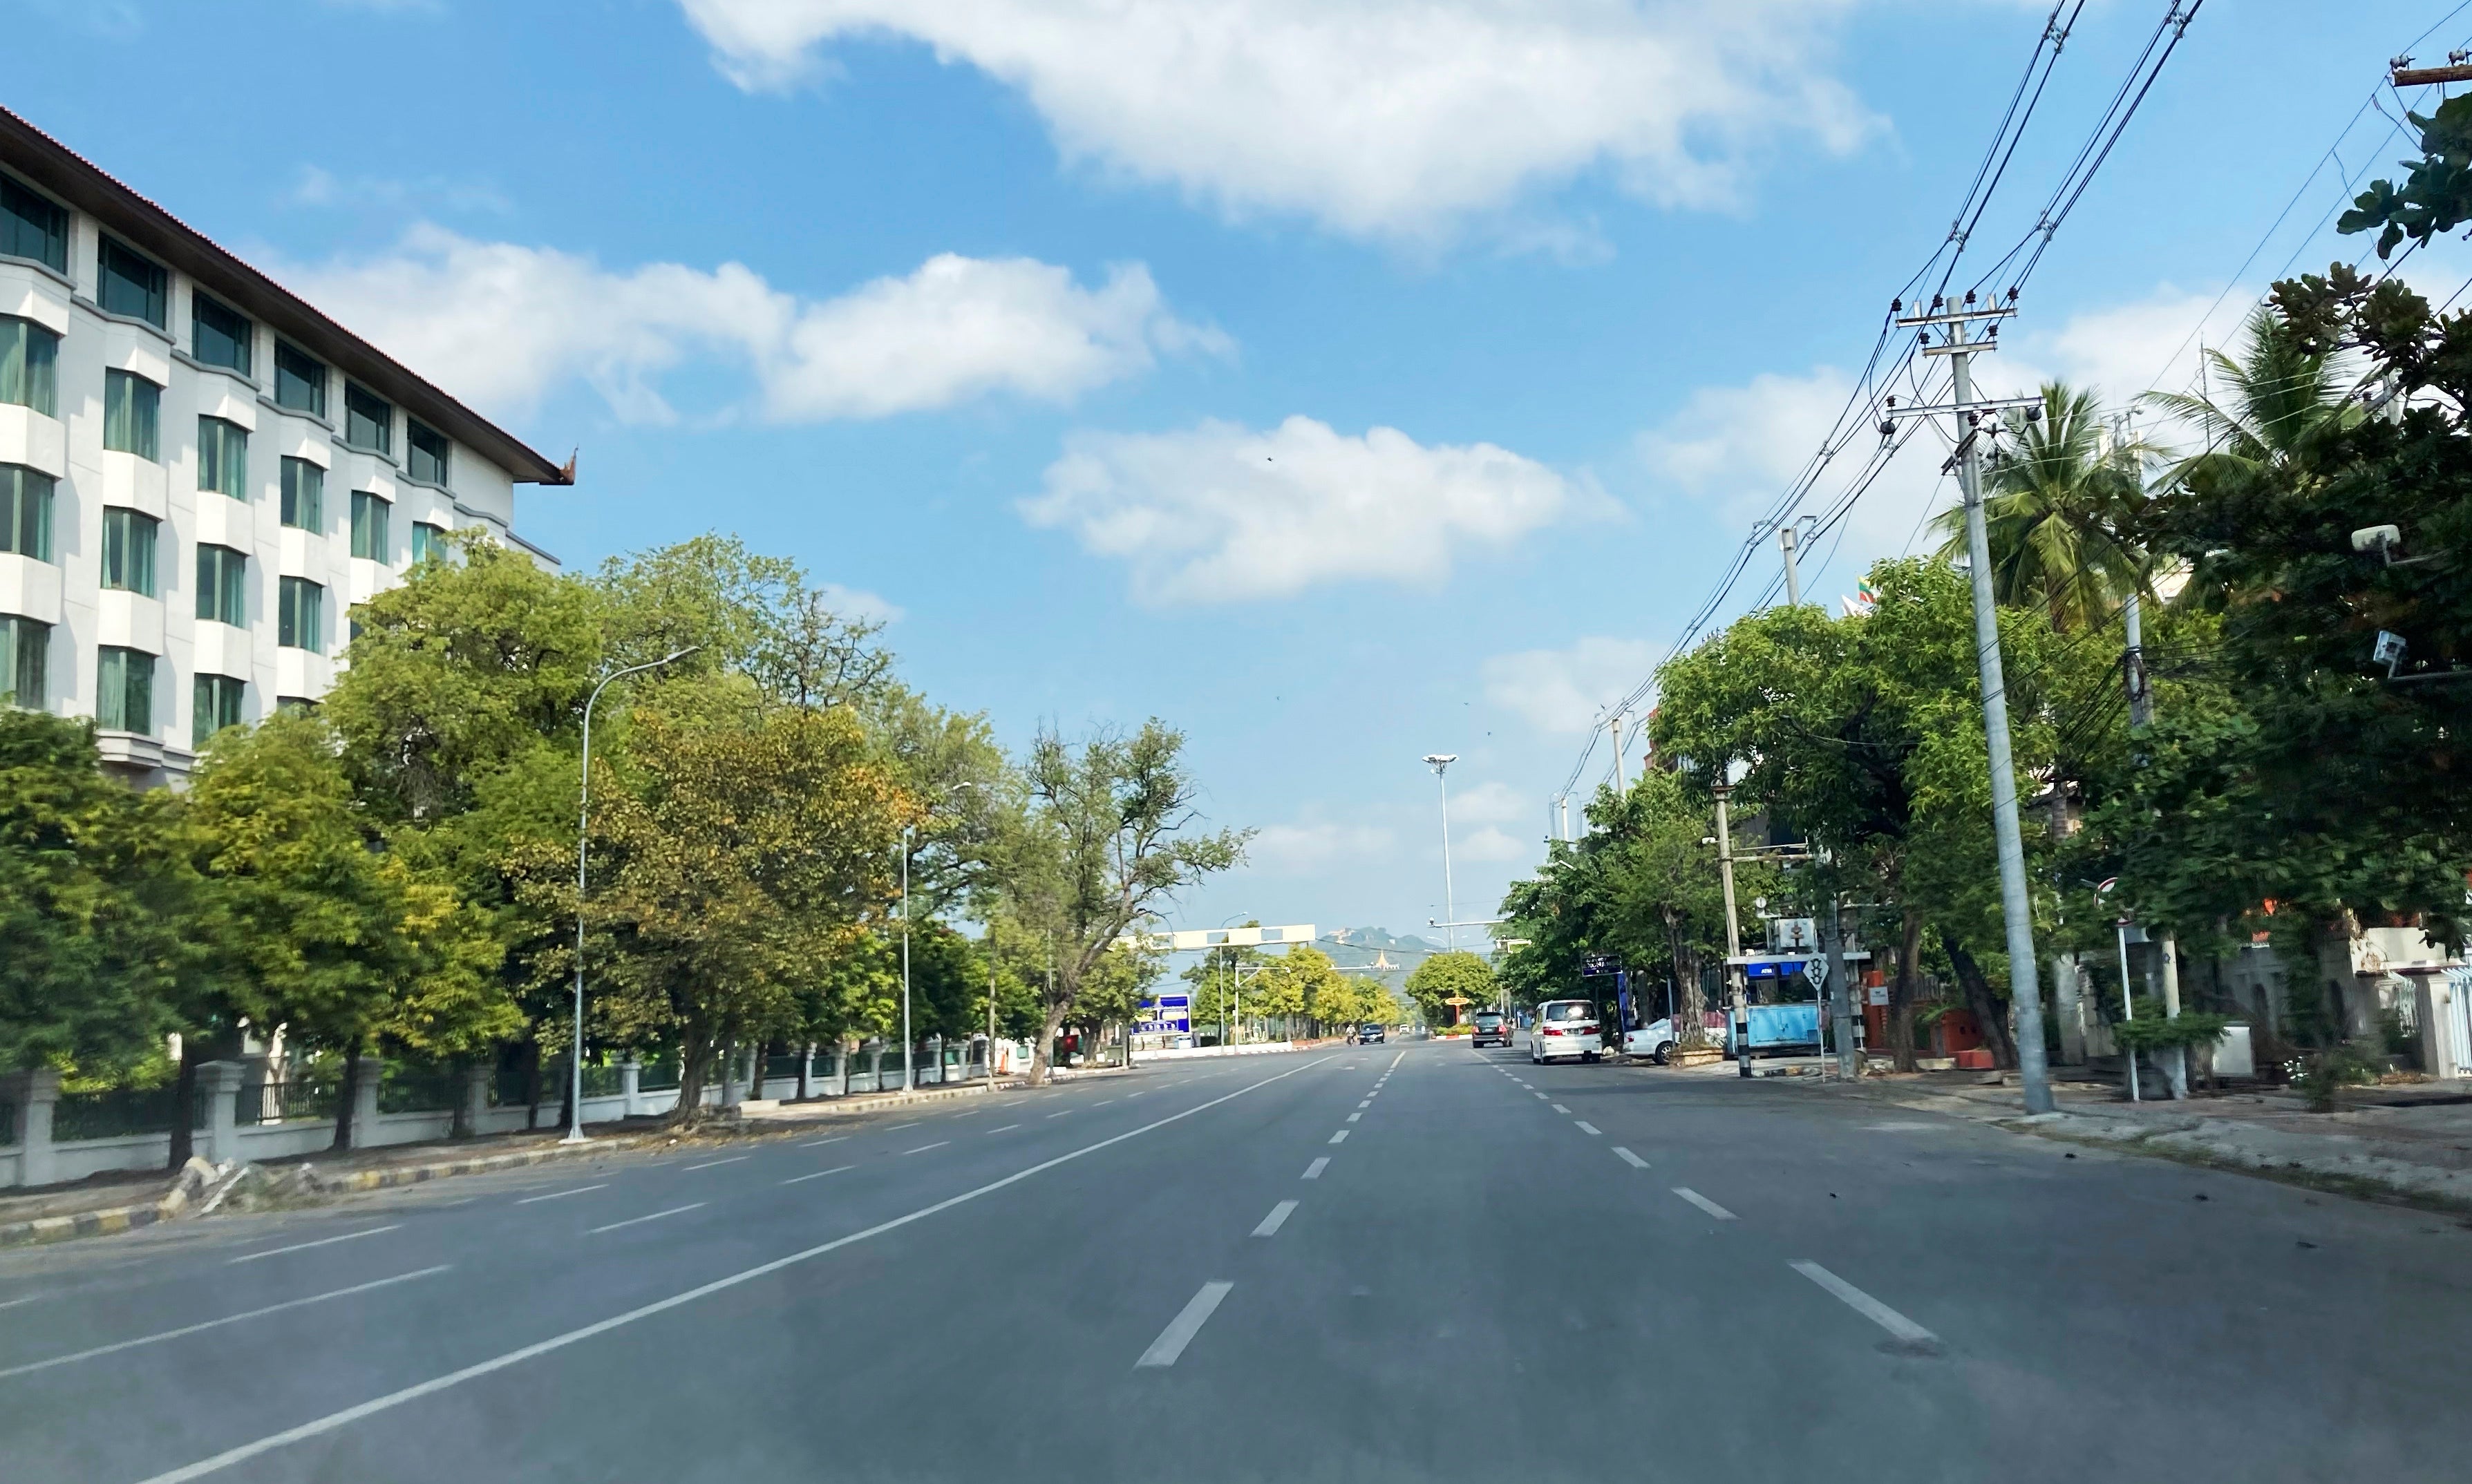 An empty street on Friday in Mandalay, central Myanmar amid a ‘silent strike’ as Soe Naing, a local freelance photographer, died in military custody after being arrested last week while covering the strike